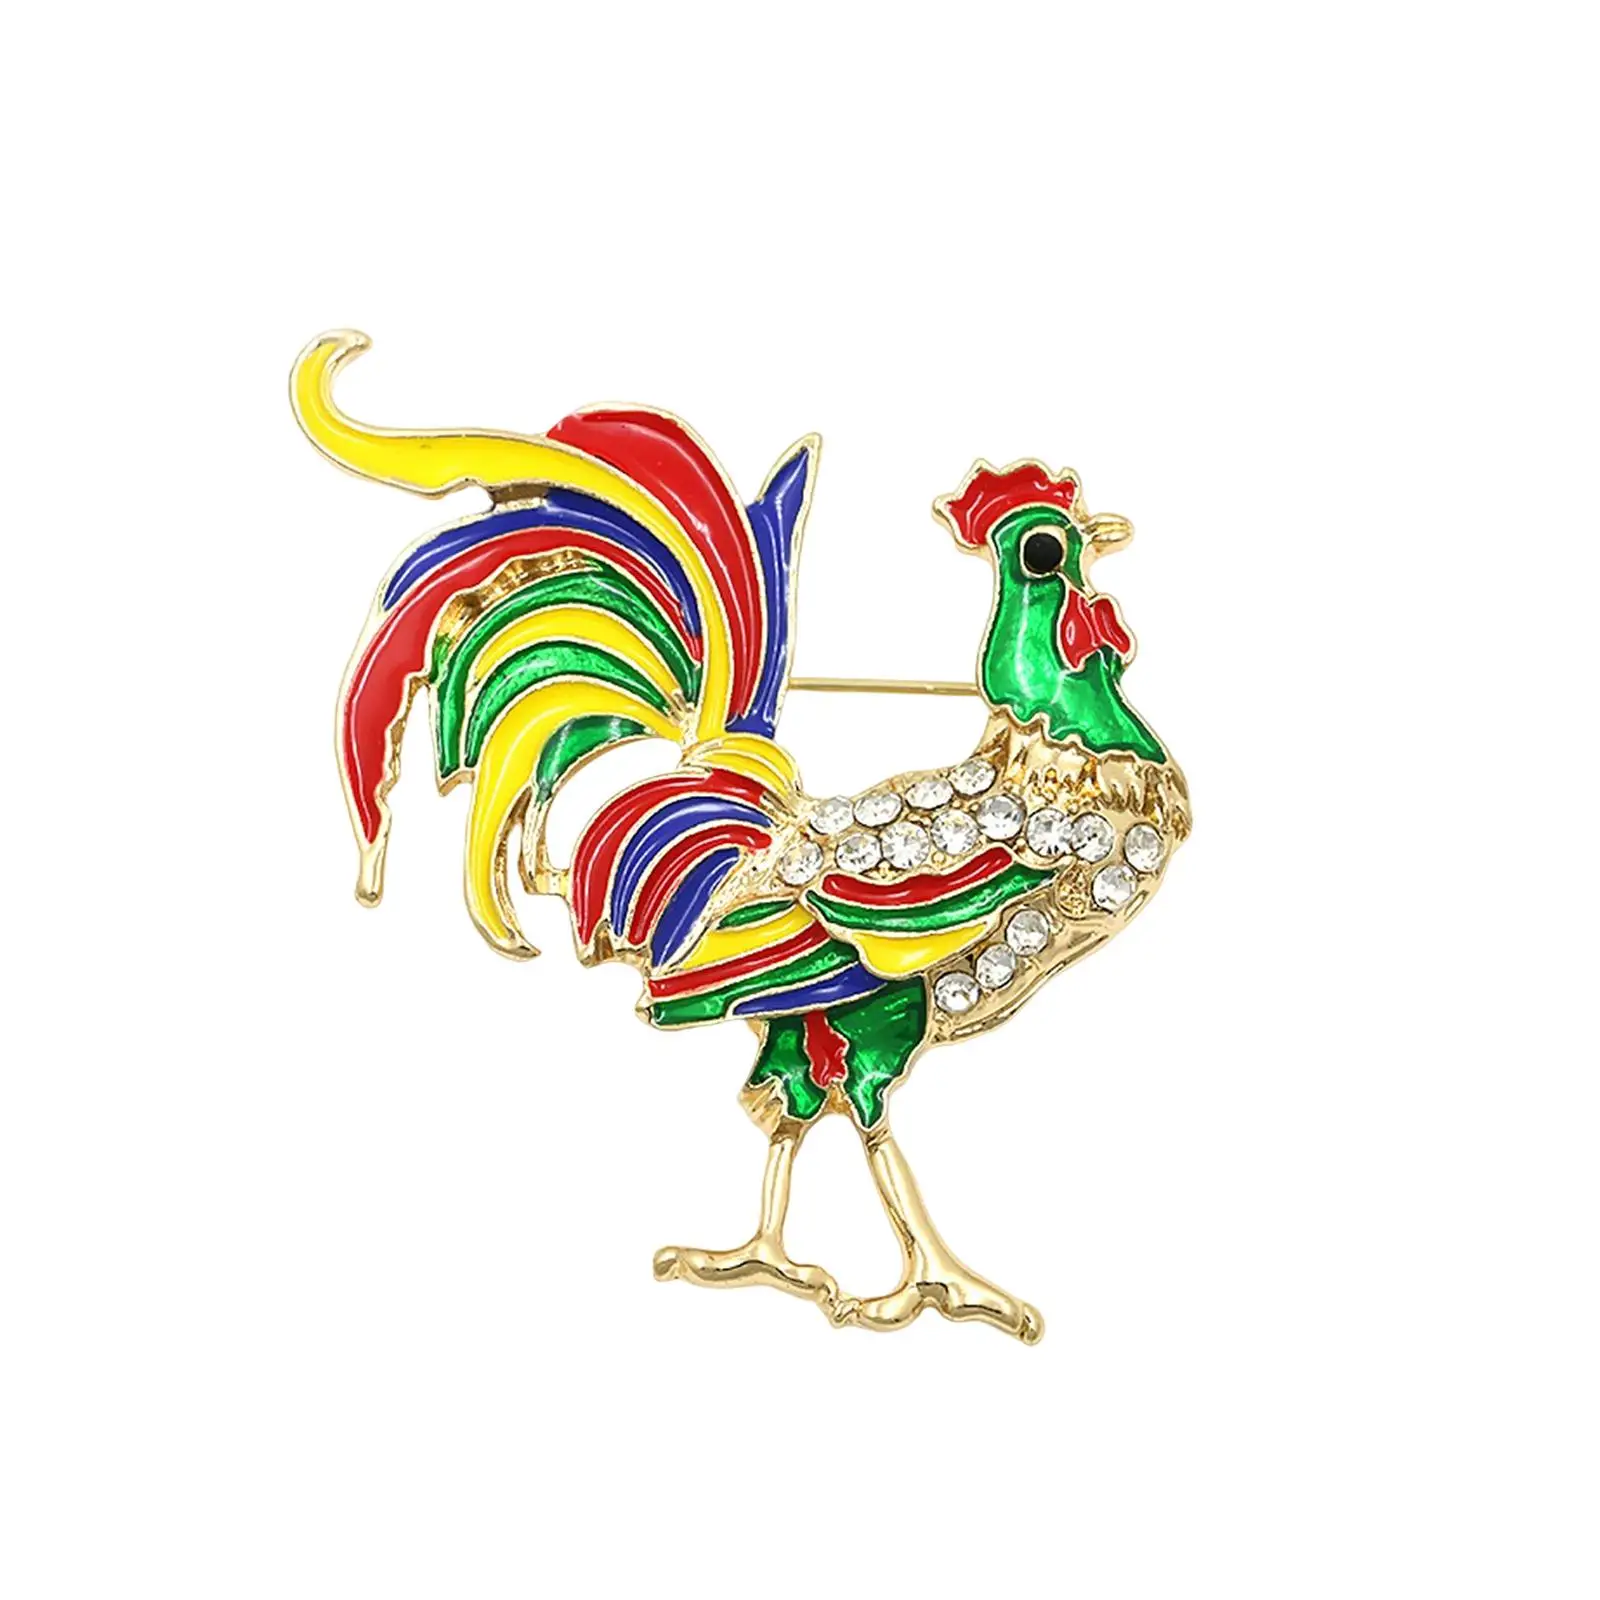 Trendy Brooch Pin Badge Corsage Ornament Decor Dress Accessories Gift Delicate Chicken Lapel Pin for Jackets Coat Shirt Bags Hat